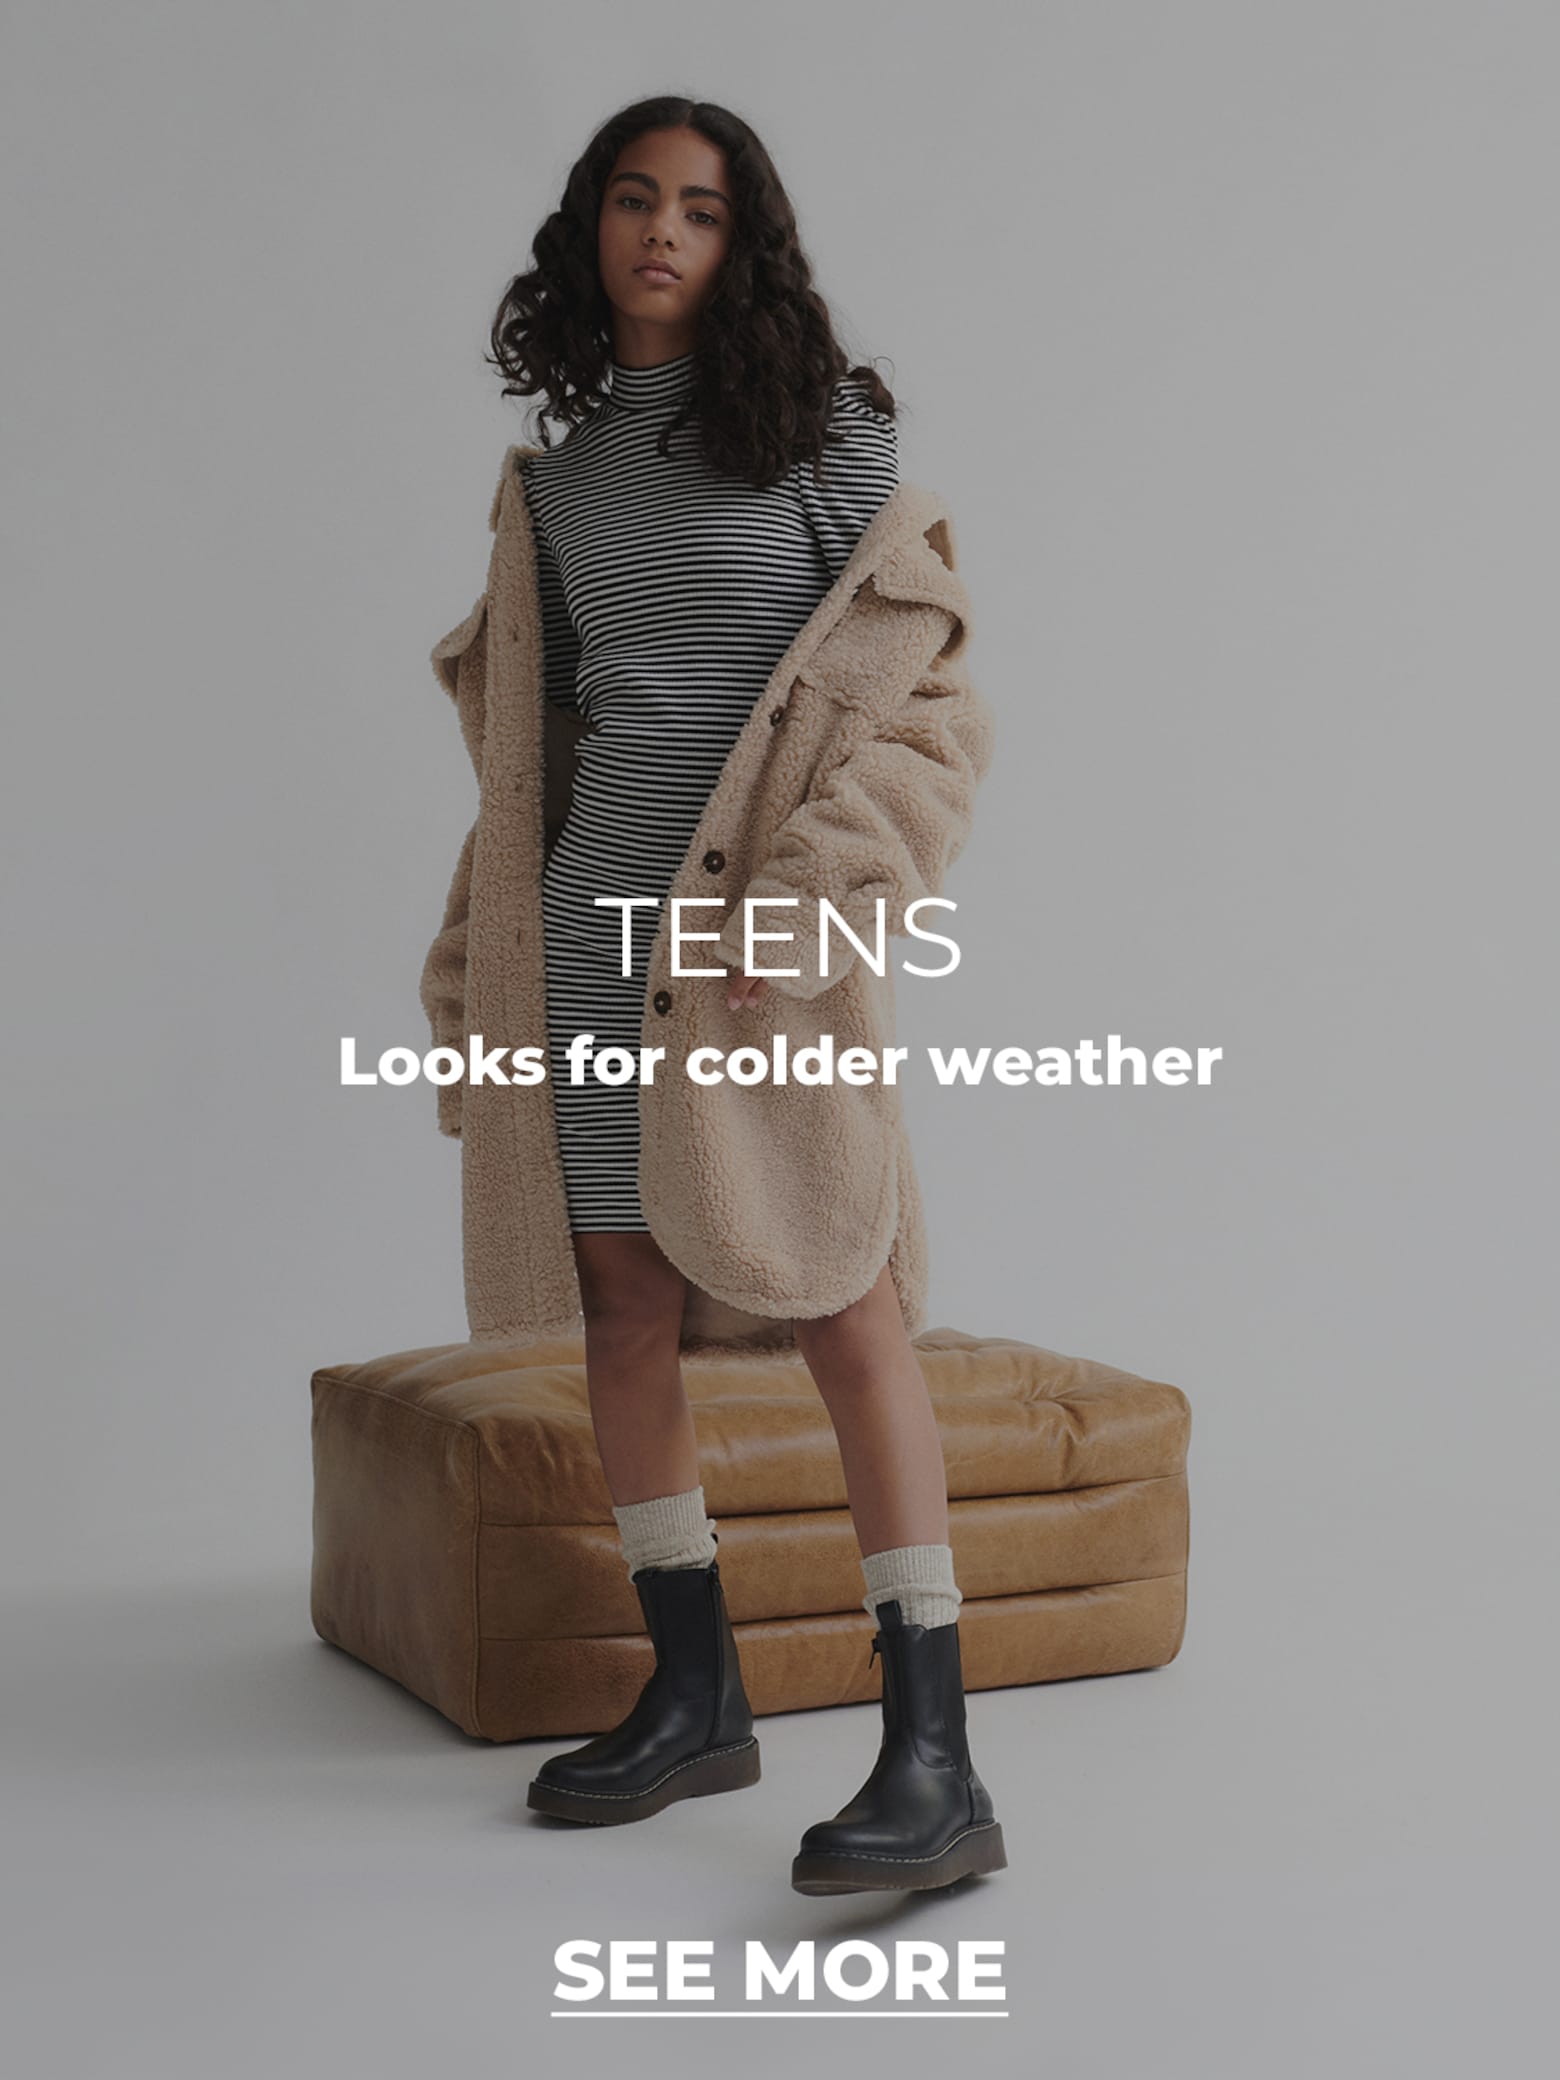 For our girls Clothing for cooler days